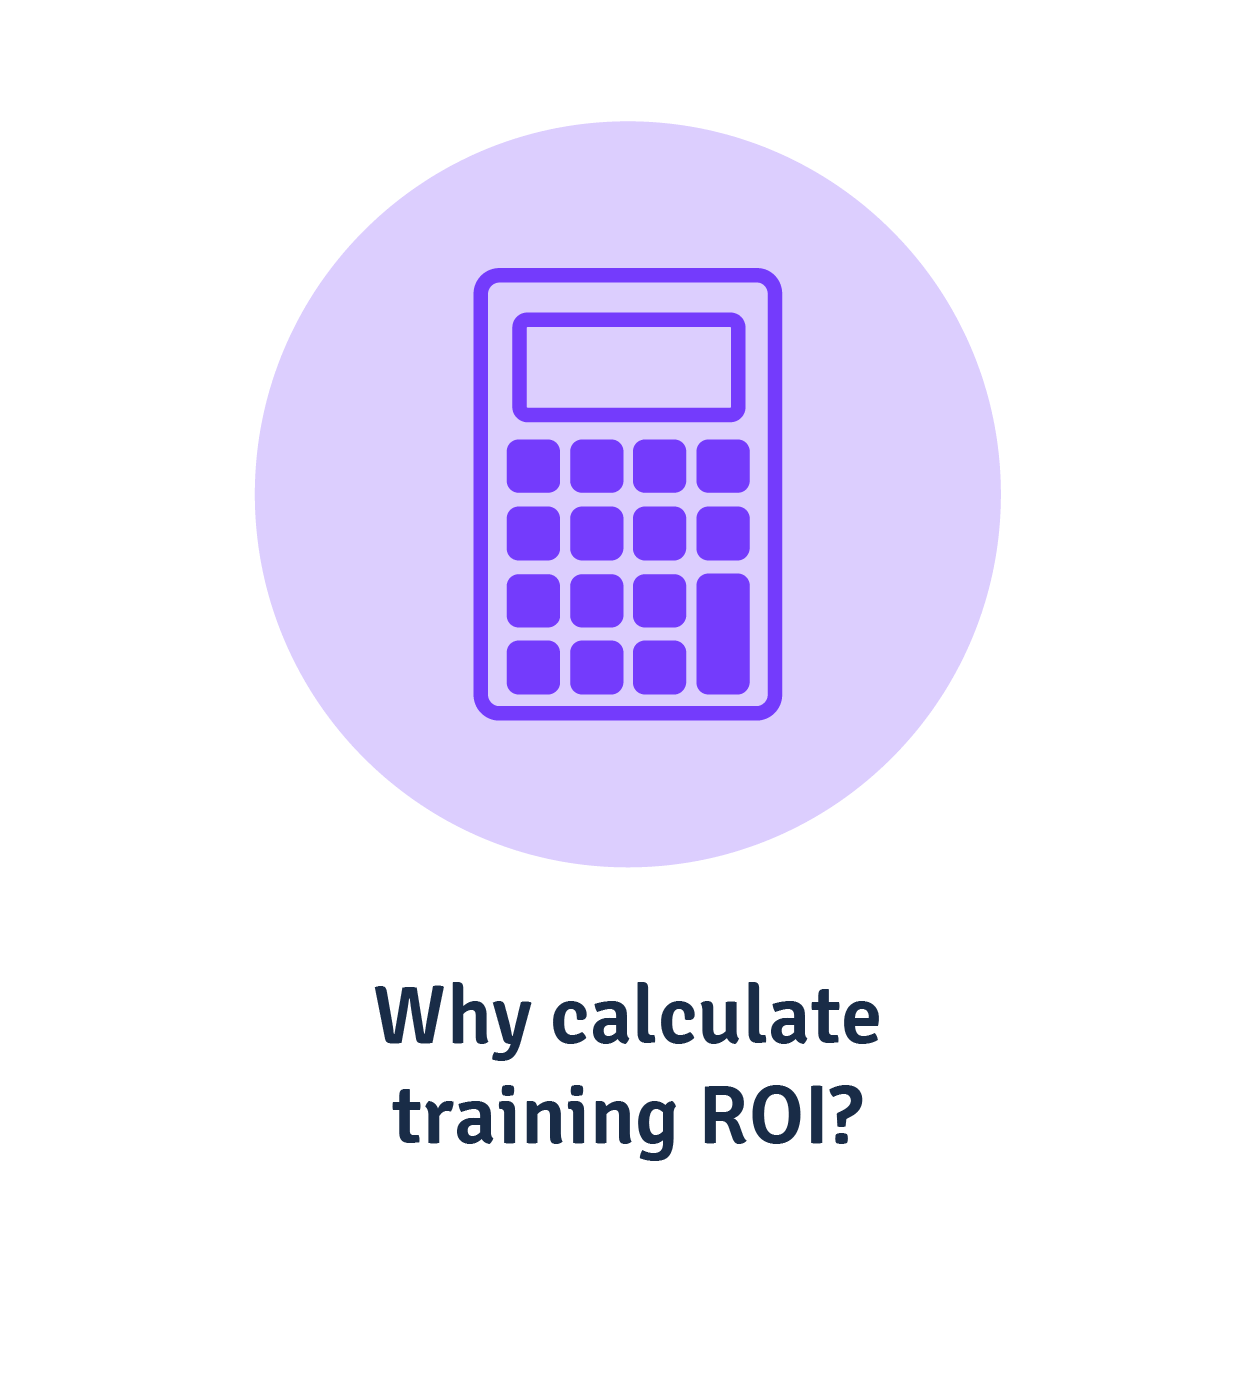 Why calculate training ROI